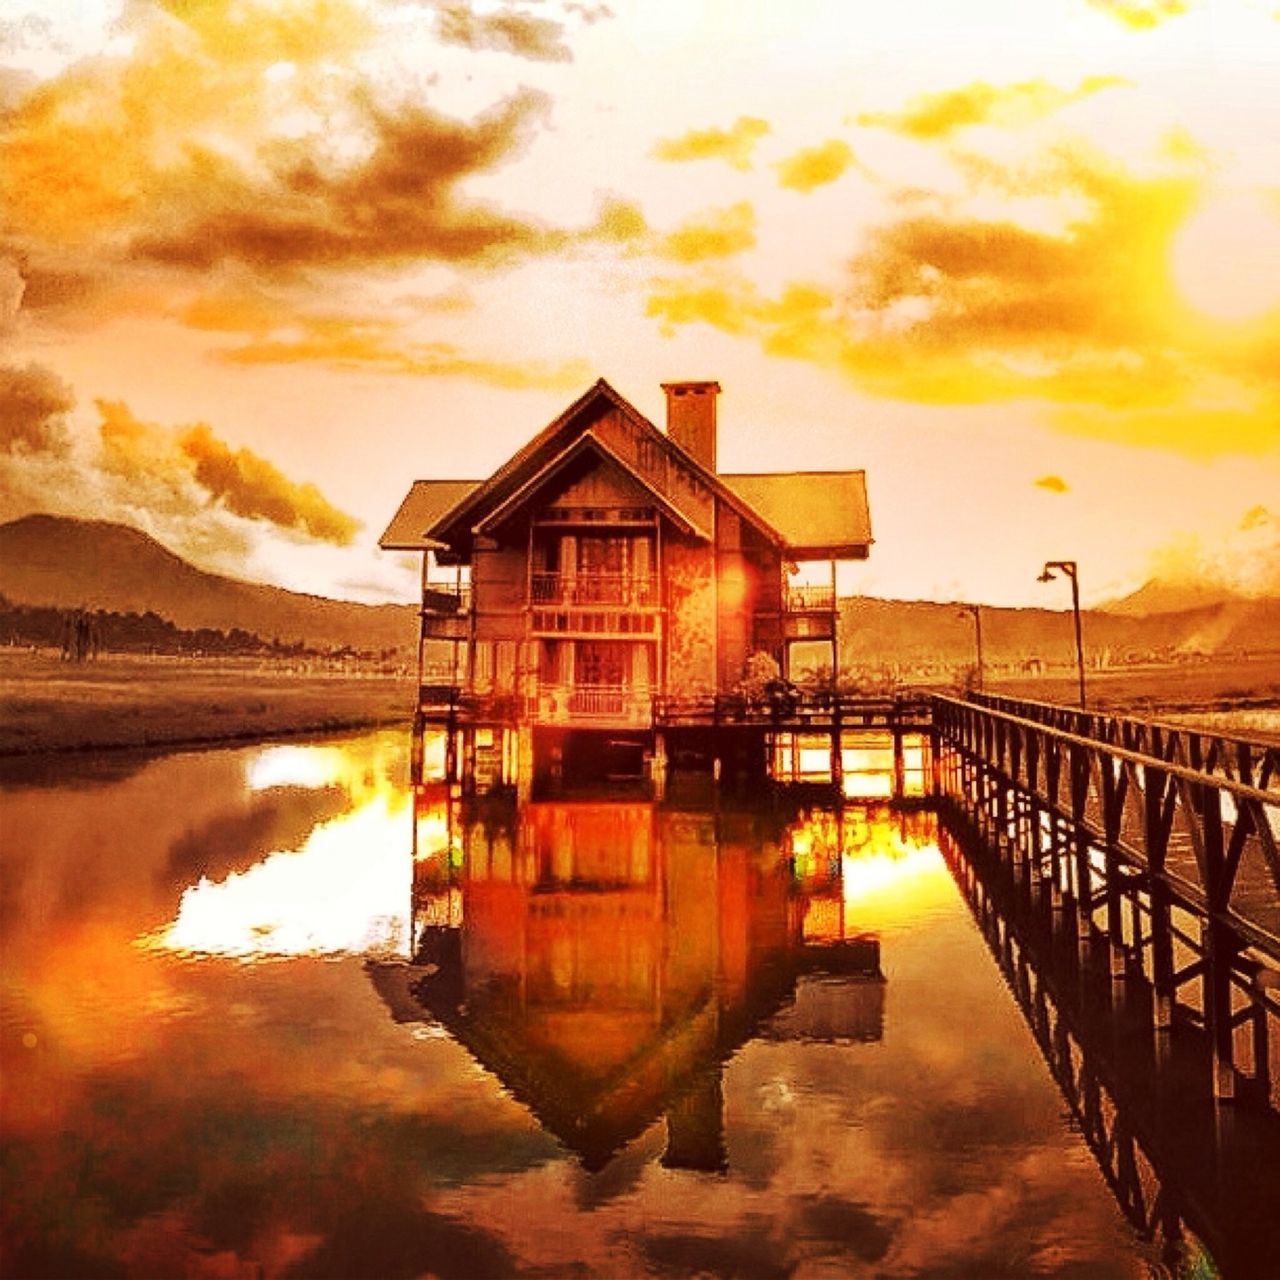 sunset, architecture, built structure, building exterior, water, sky, orange color, cloud - sky, reflection, waterfront, pier, cloud, railing, river, scenics, cloudy, beauty in nature, sea, dramatic sky, lake